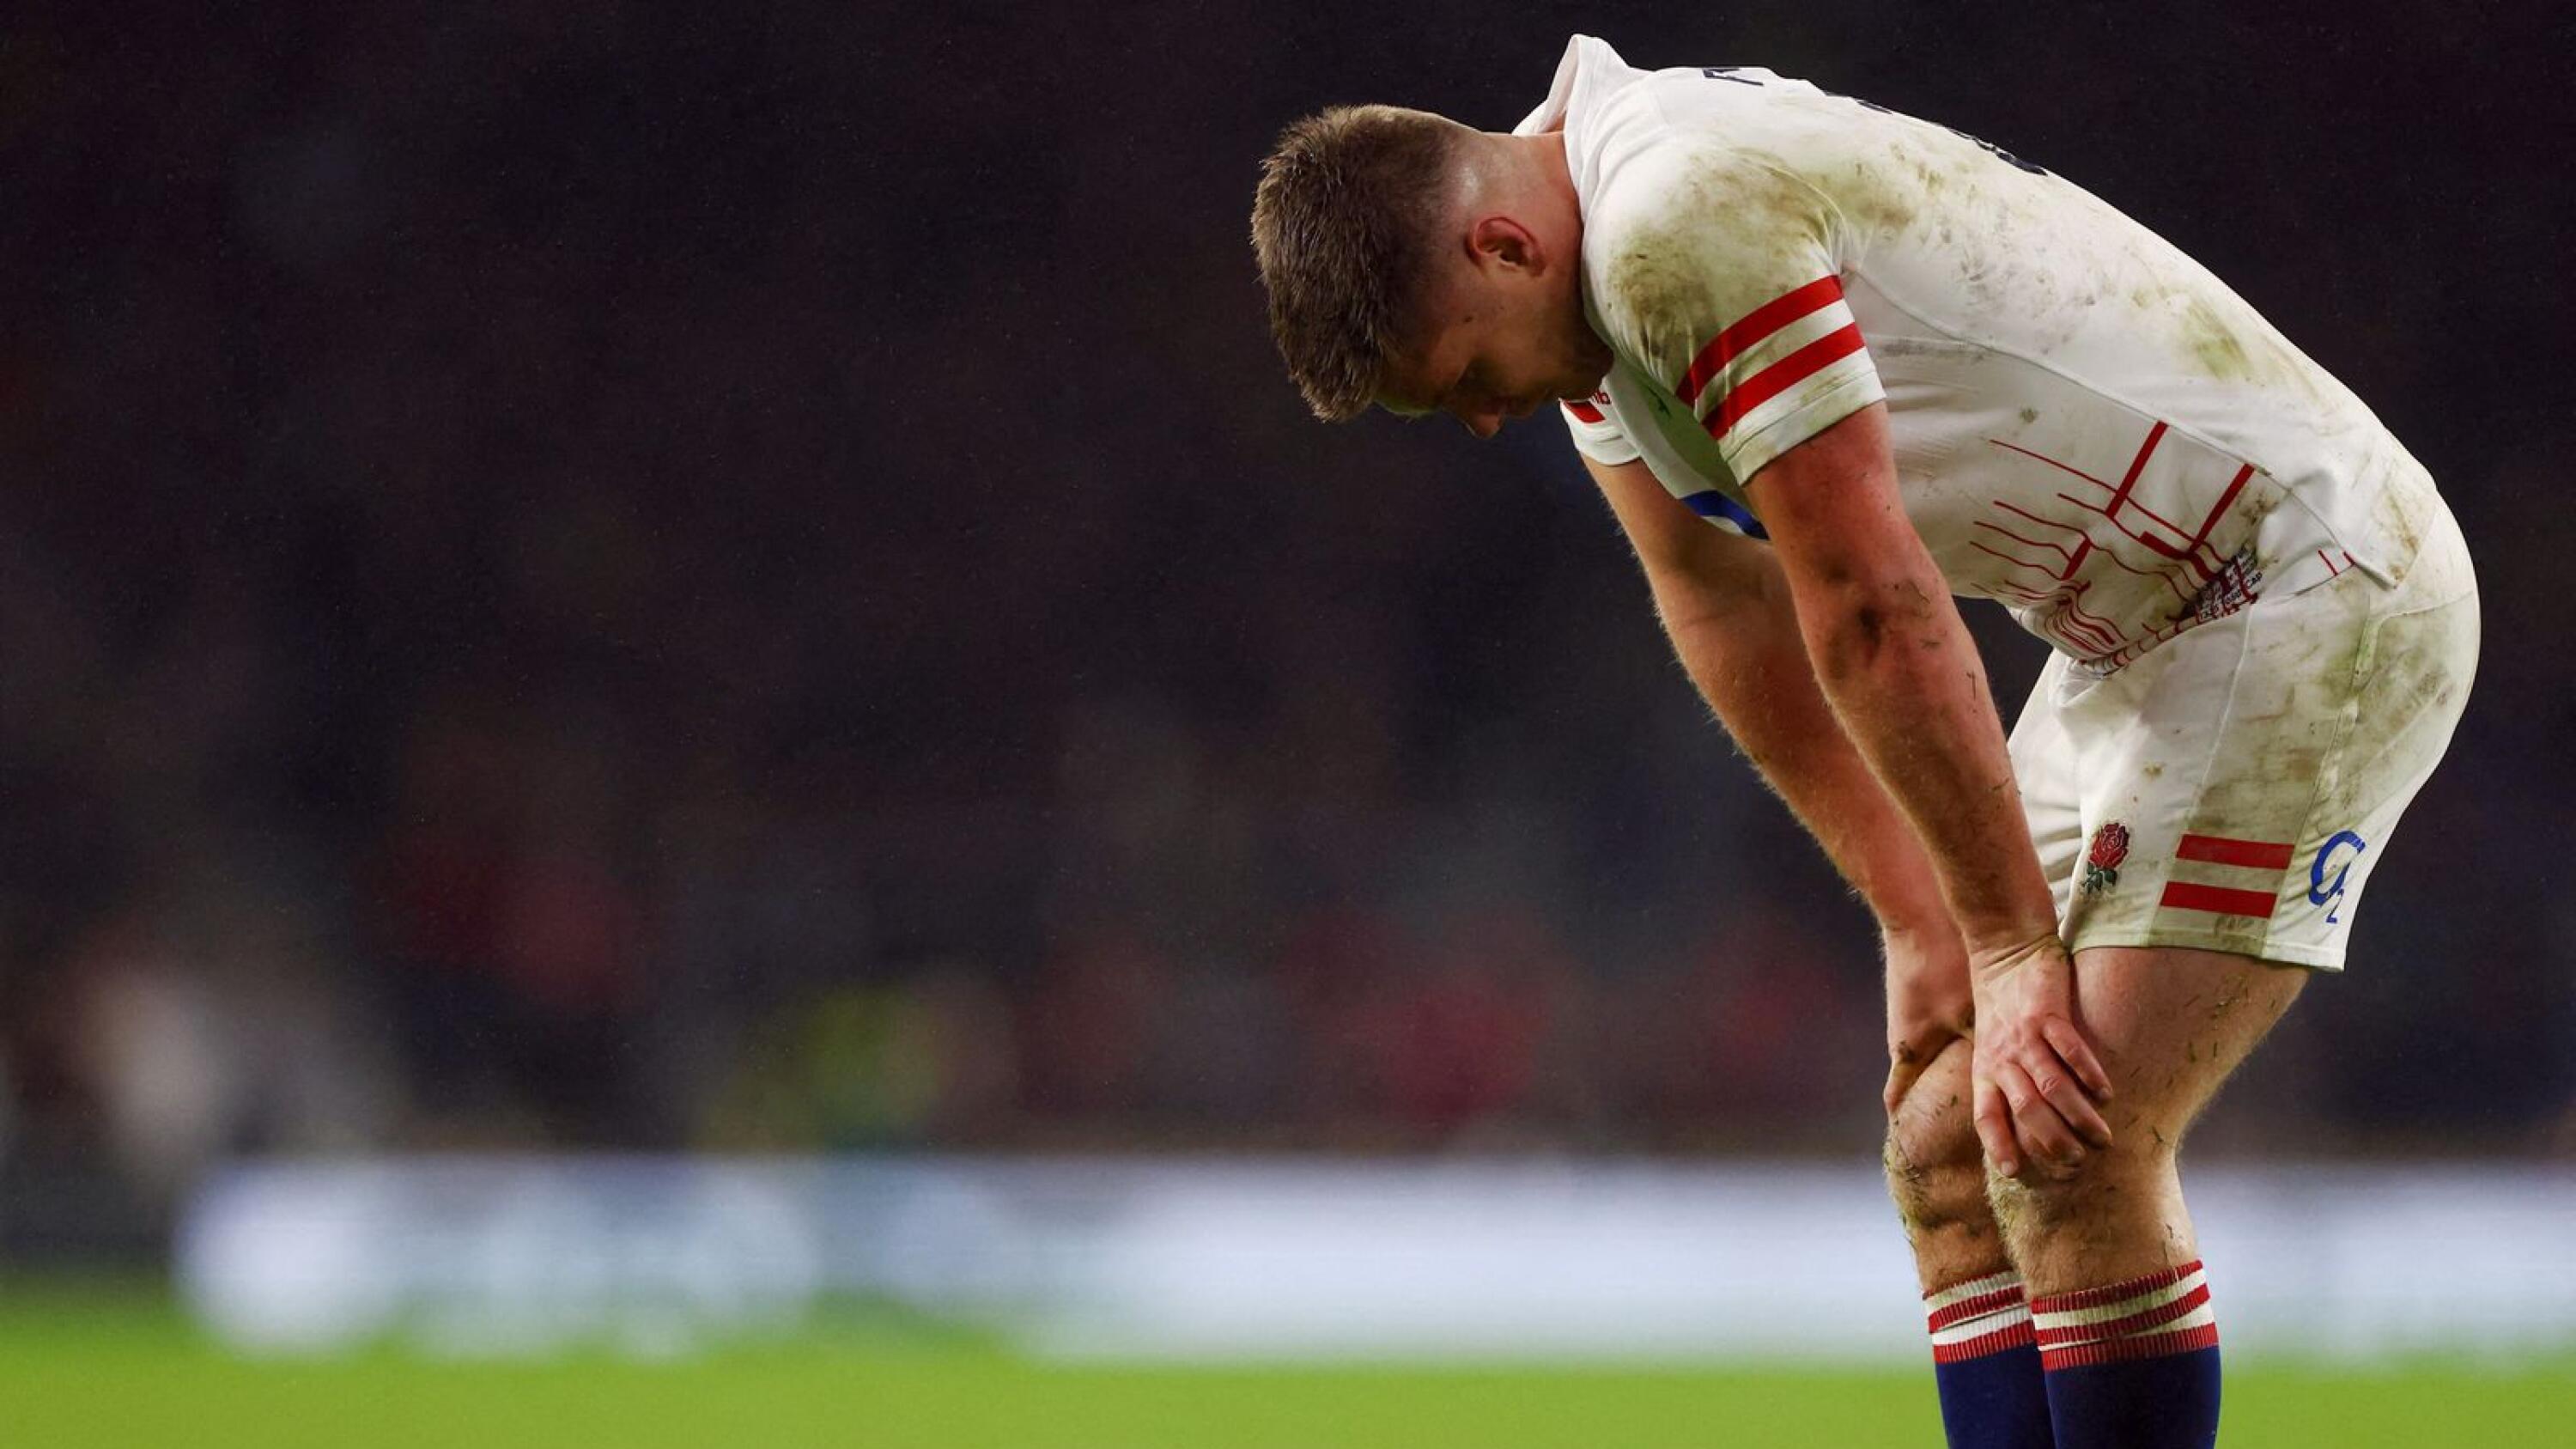 England's Owen Farrell looks dejected after their humiliating defeat against France in Saturday’s Six Nations clash at Twickenham